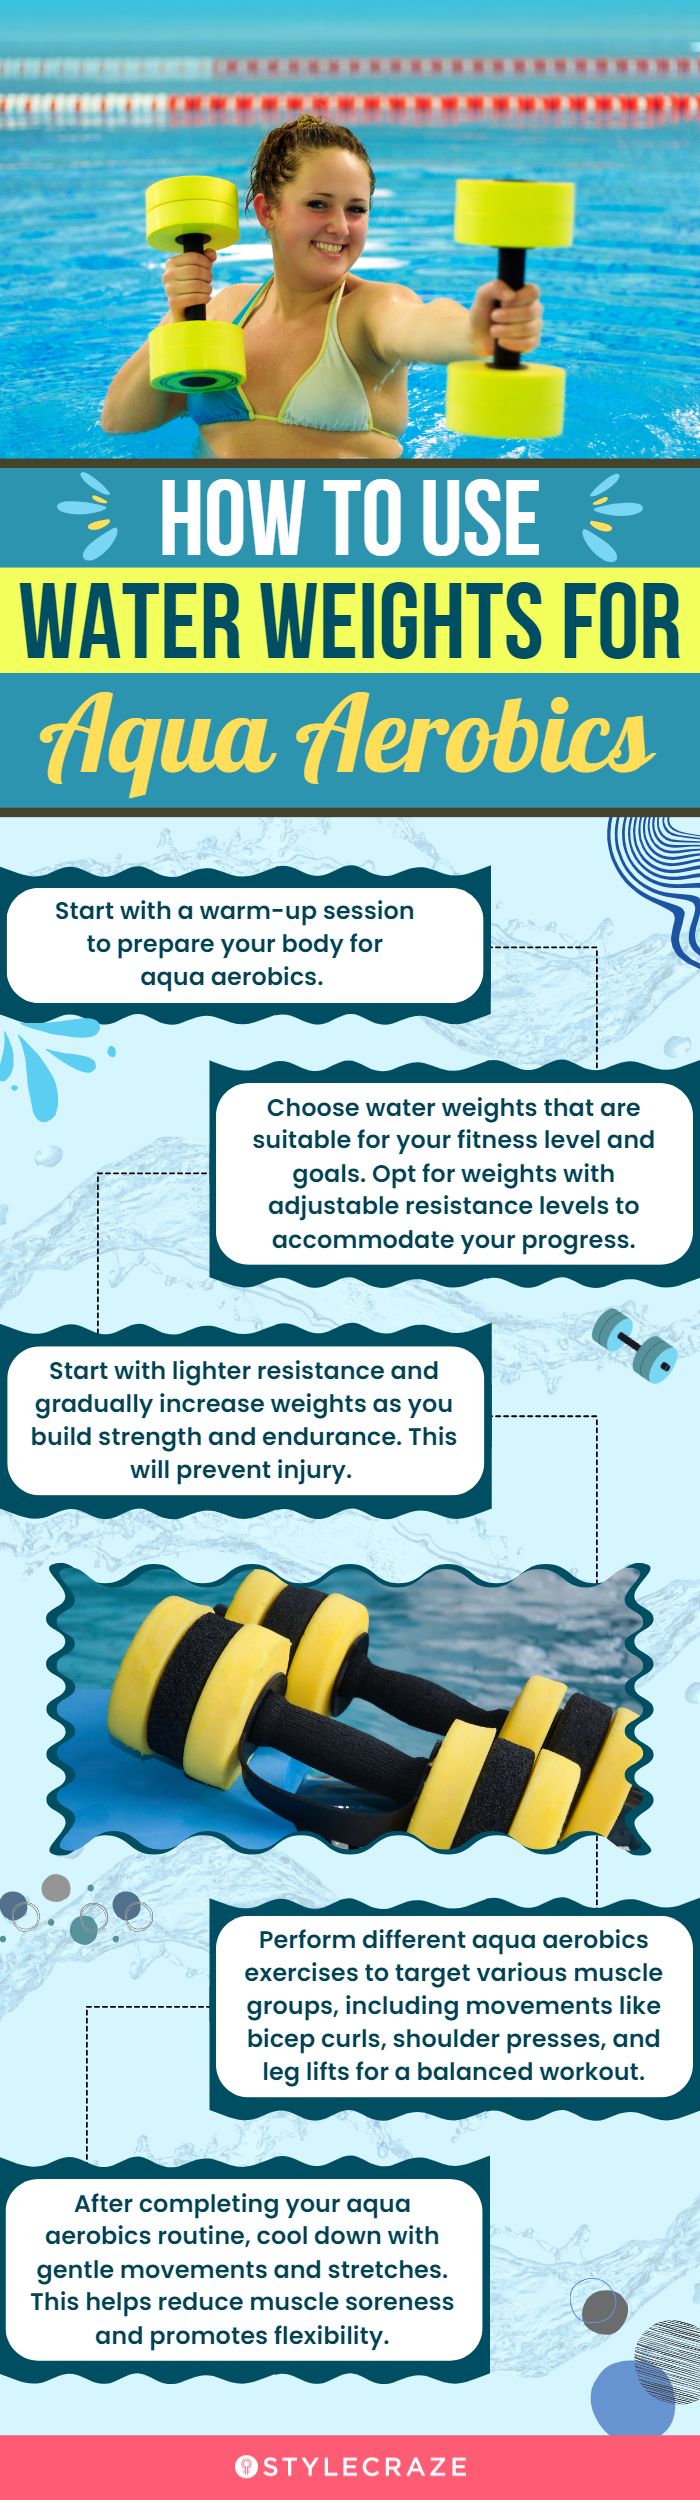 How To Use Water Weighs For Aqua Aerobics (infographic)